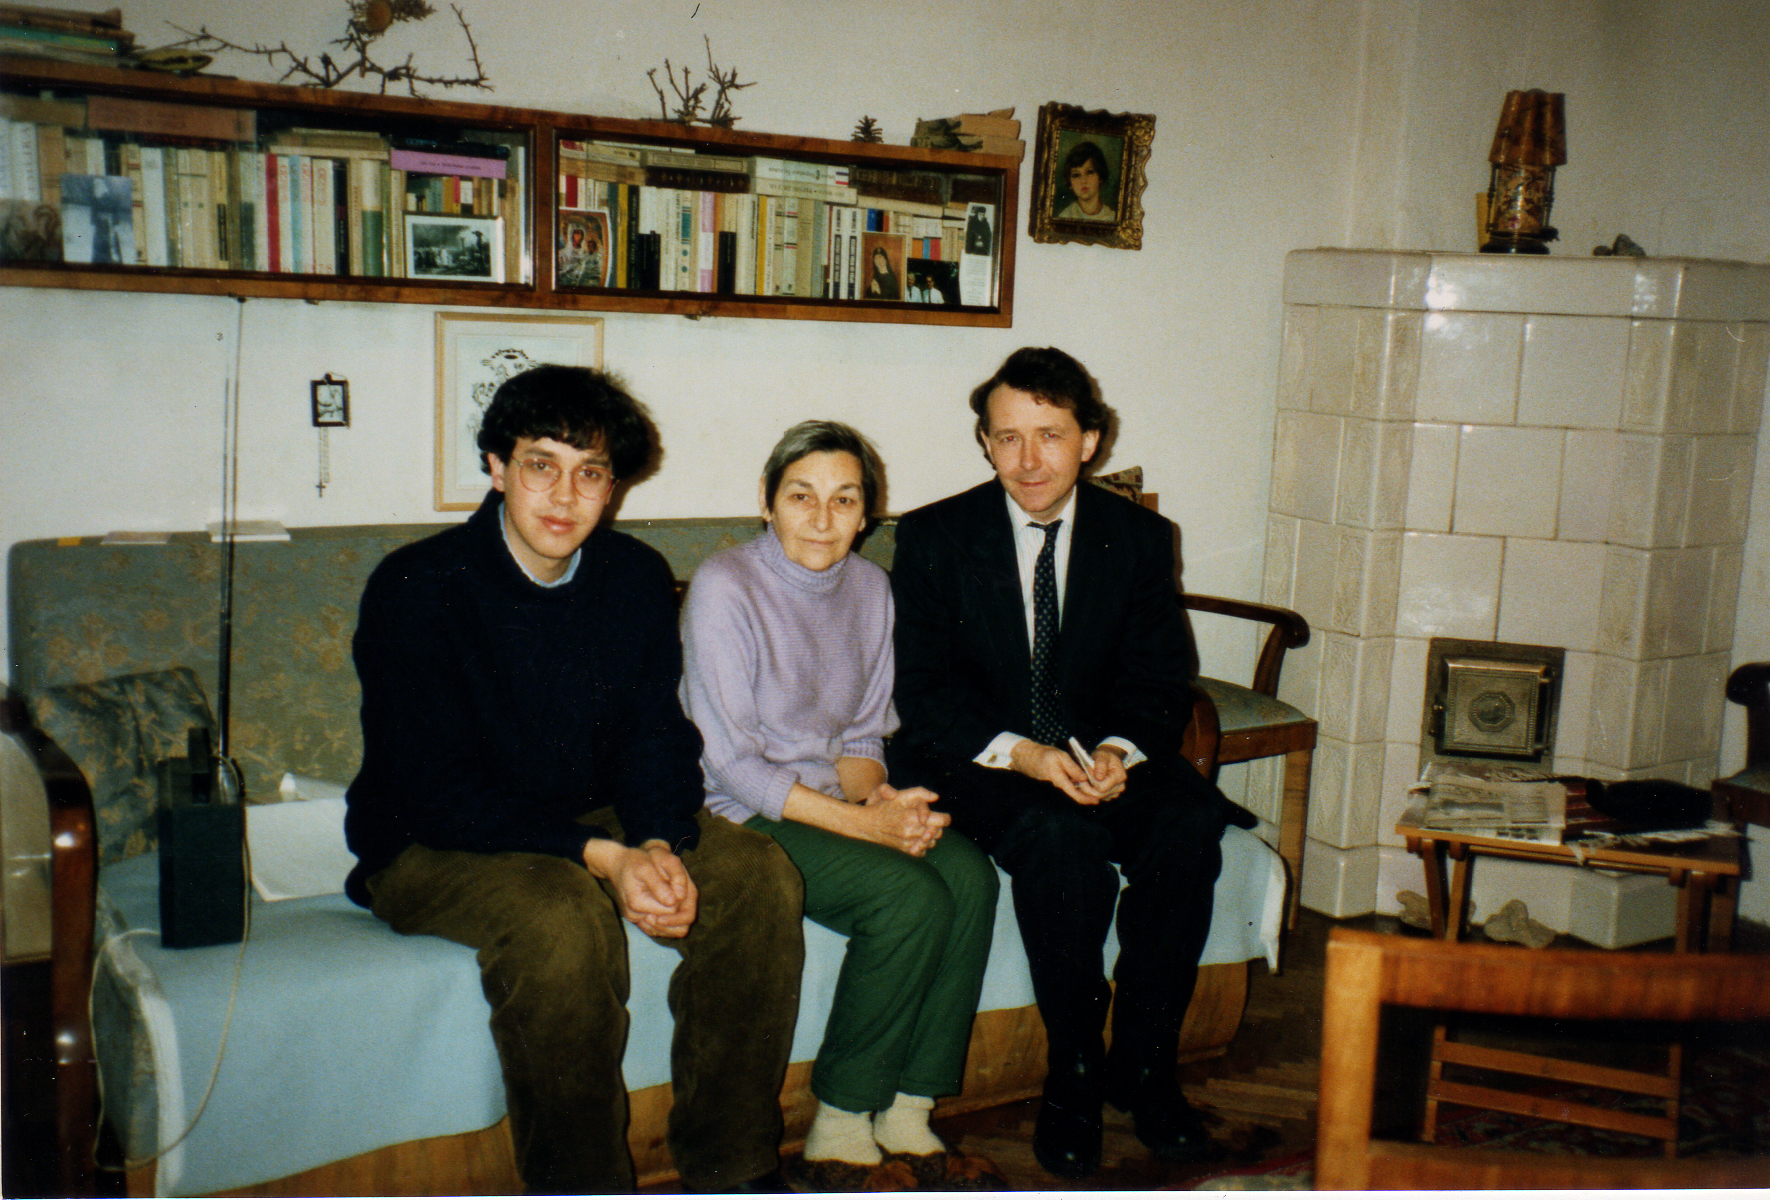 1989 With Doina Cornea at her home in Cluj, Transylvania, voiceferous and courageous Greek Catholic opponent of Ceaucesccu